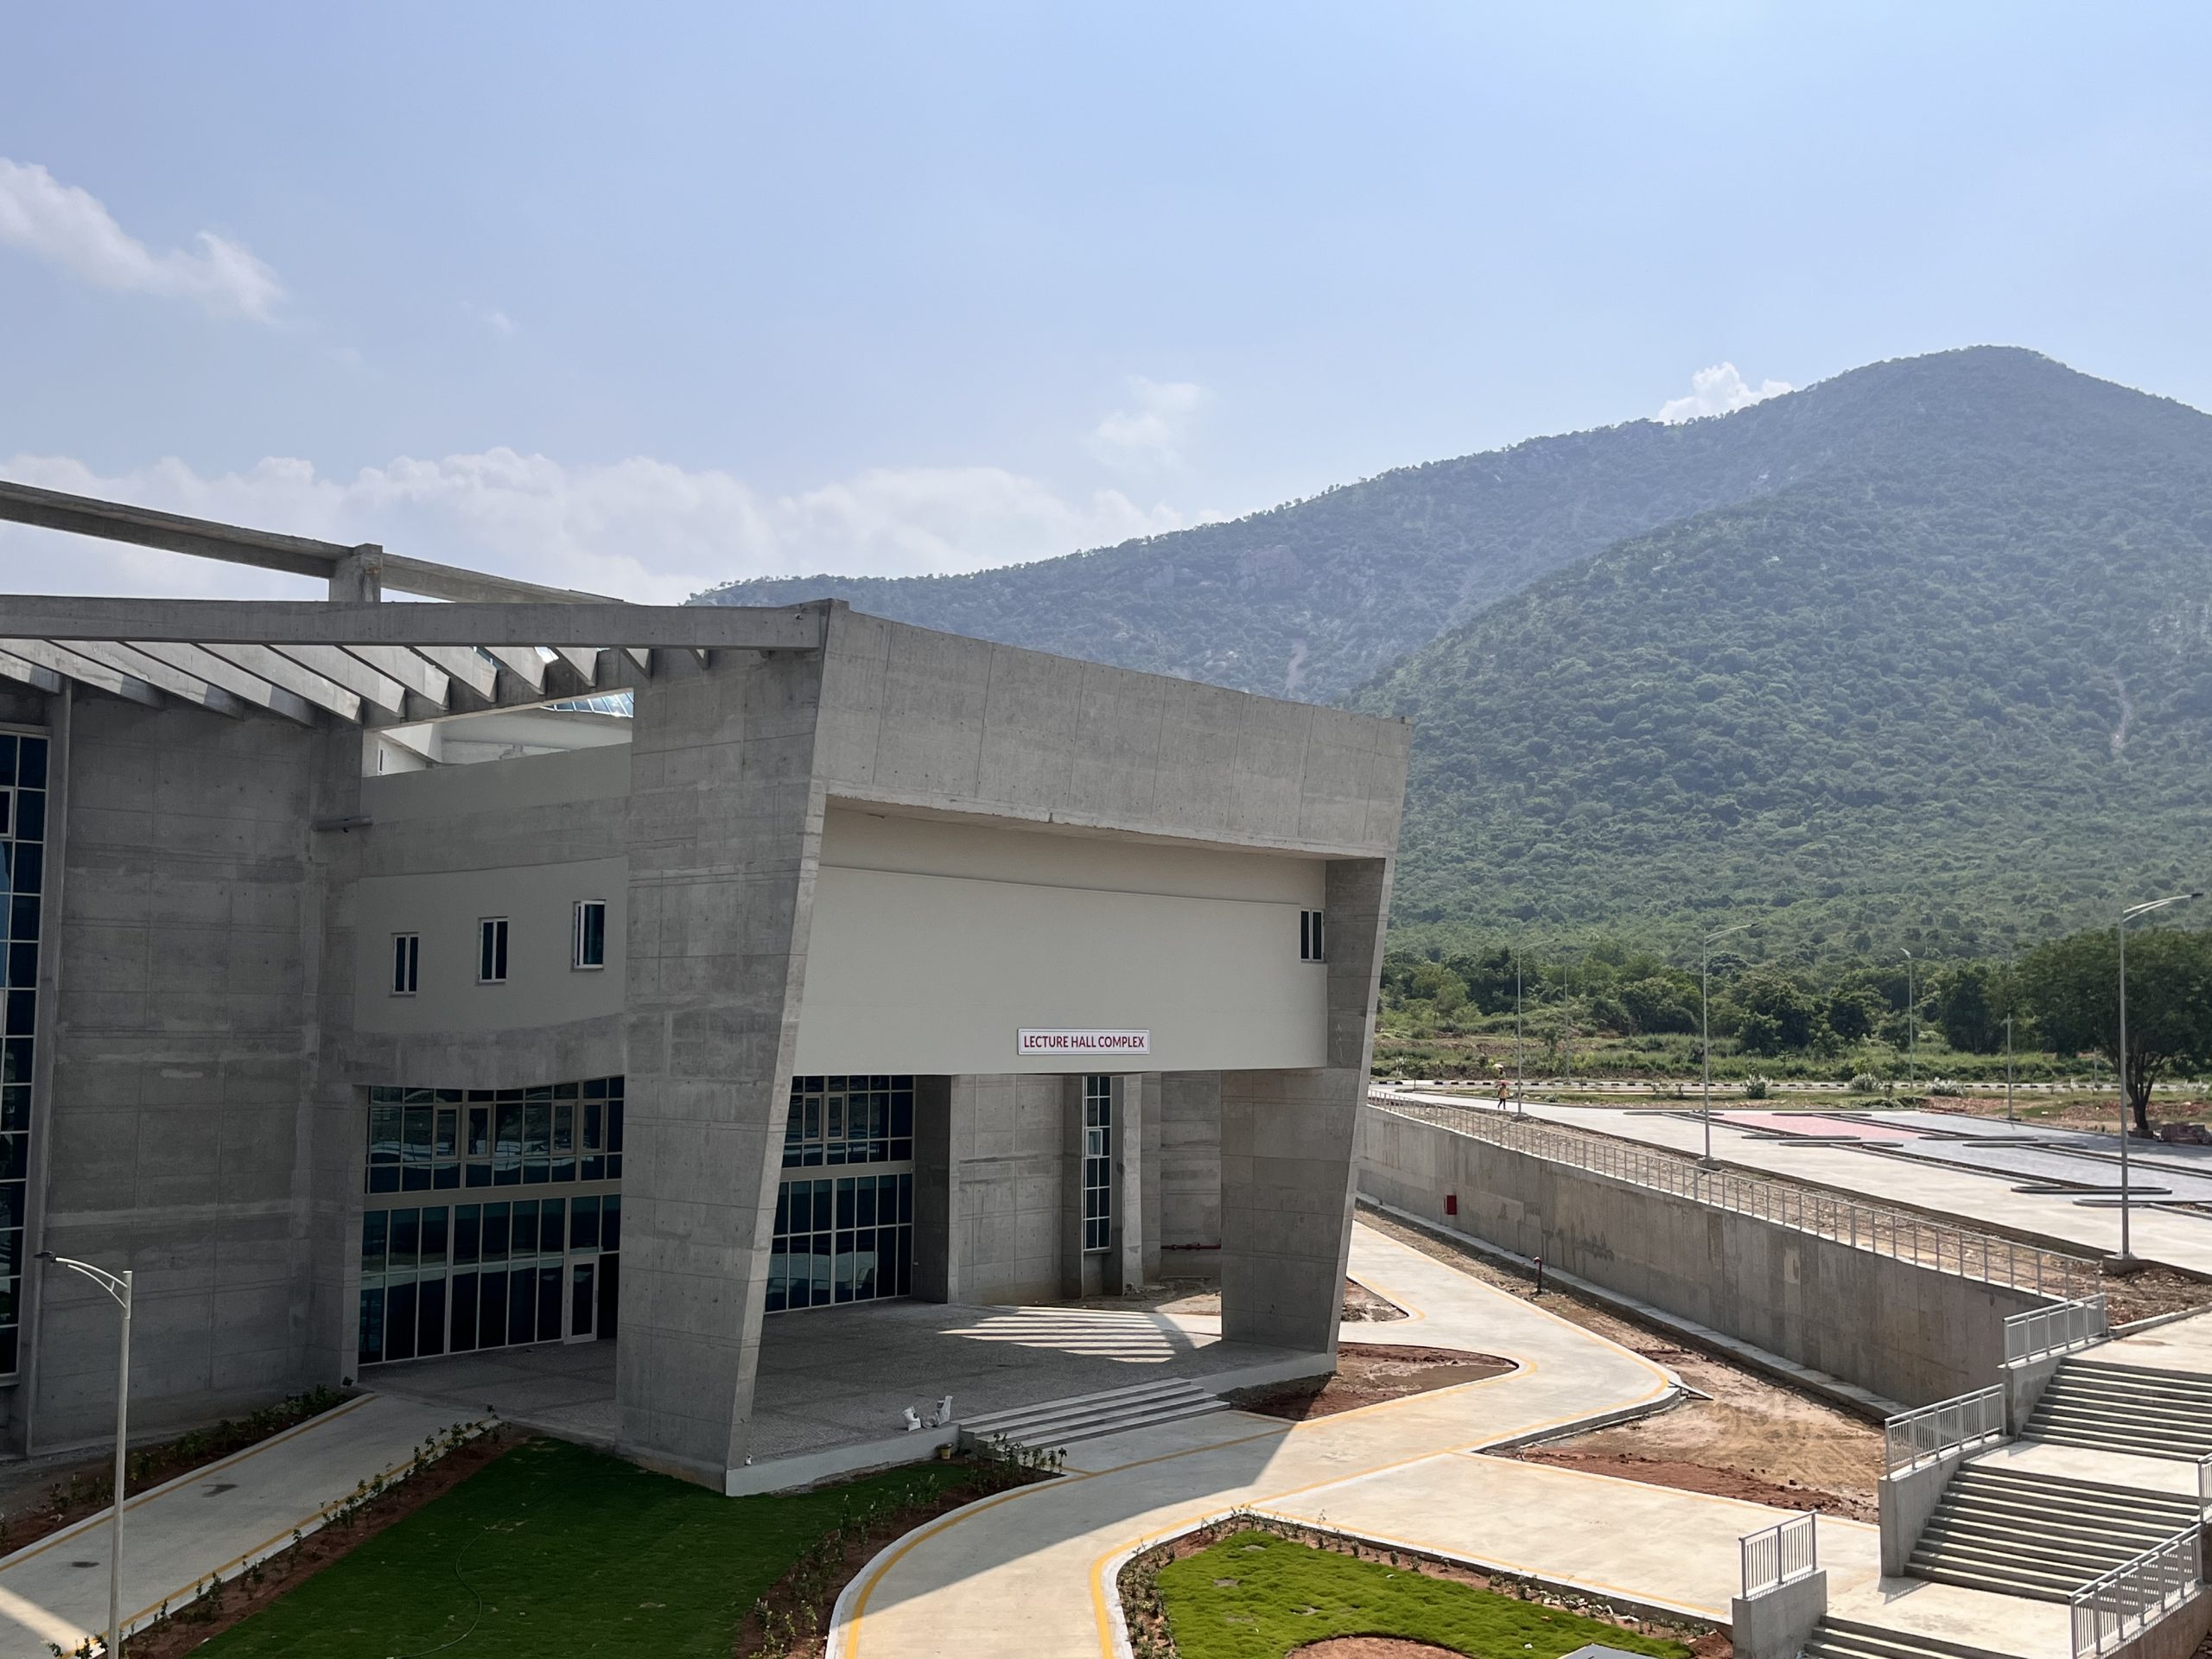 The new campus of The Indian Institute of Technology (IIT) Tirupati, Andhra Pradesh